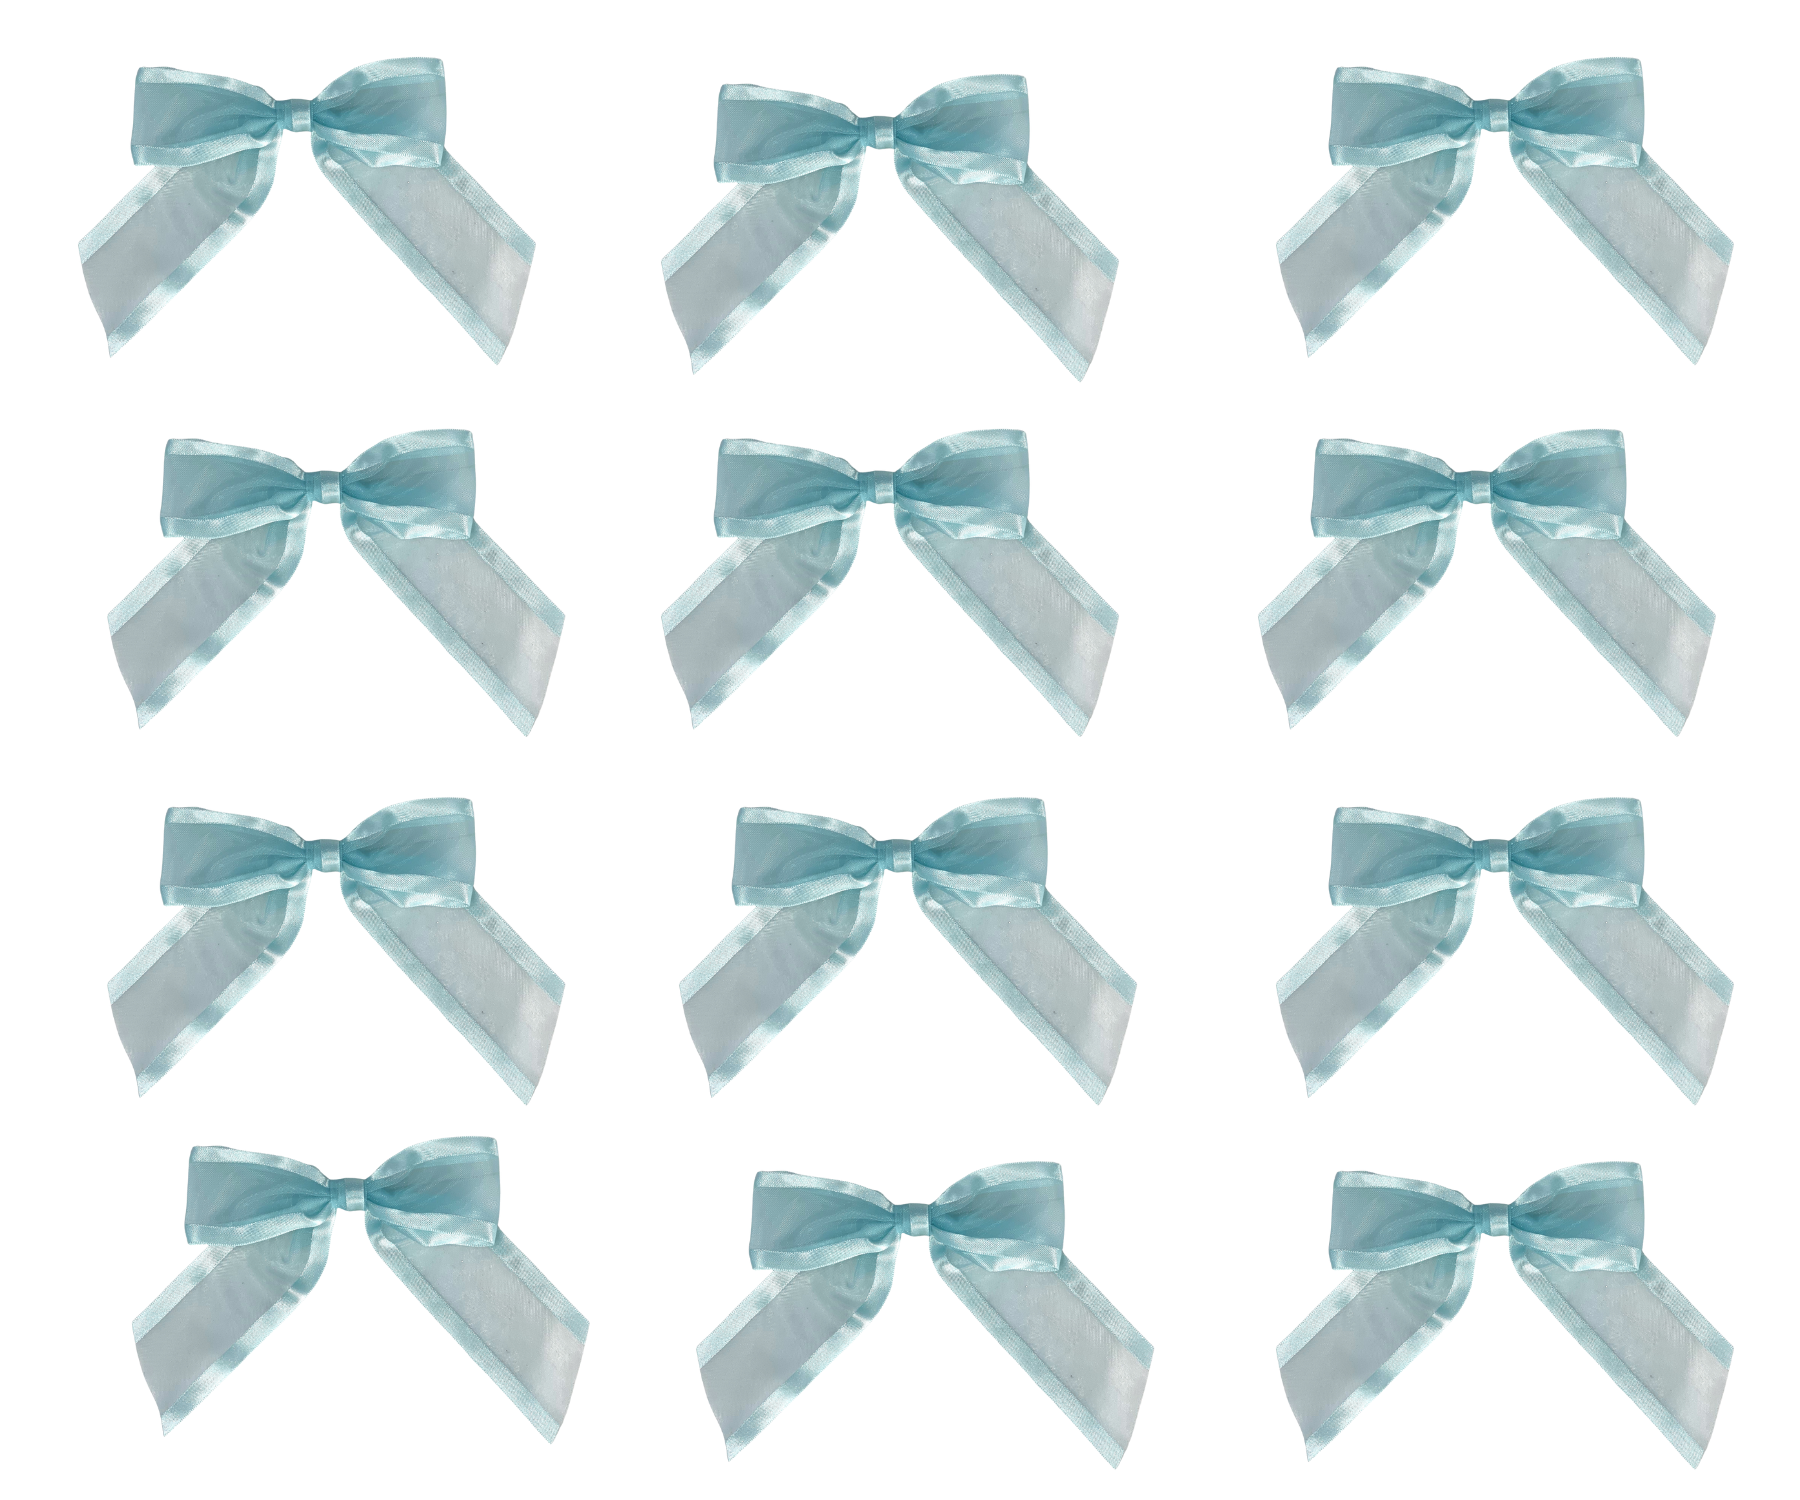 Pre-Tied Light Blue Organza Bows - 4 1/2 inch Wide, Set of 12, Craft Ribbon Bow, Satin Edge, Christmas, Wedding, Easter, Party Favors, Baby Shower